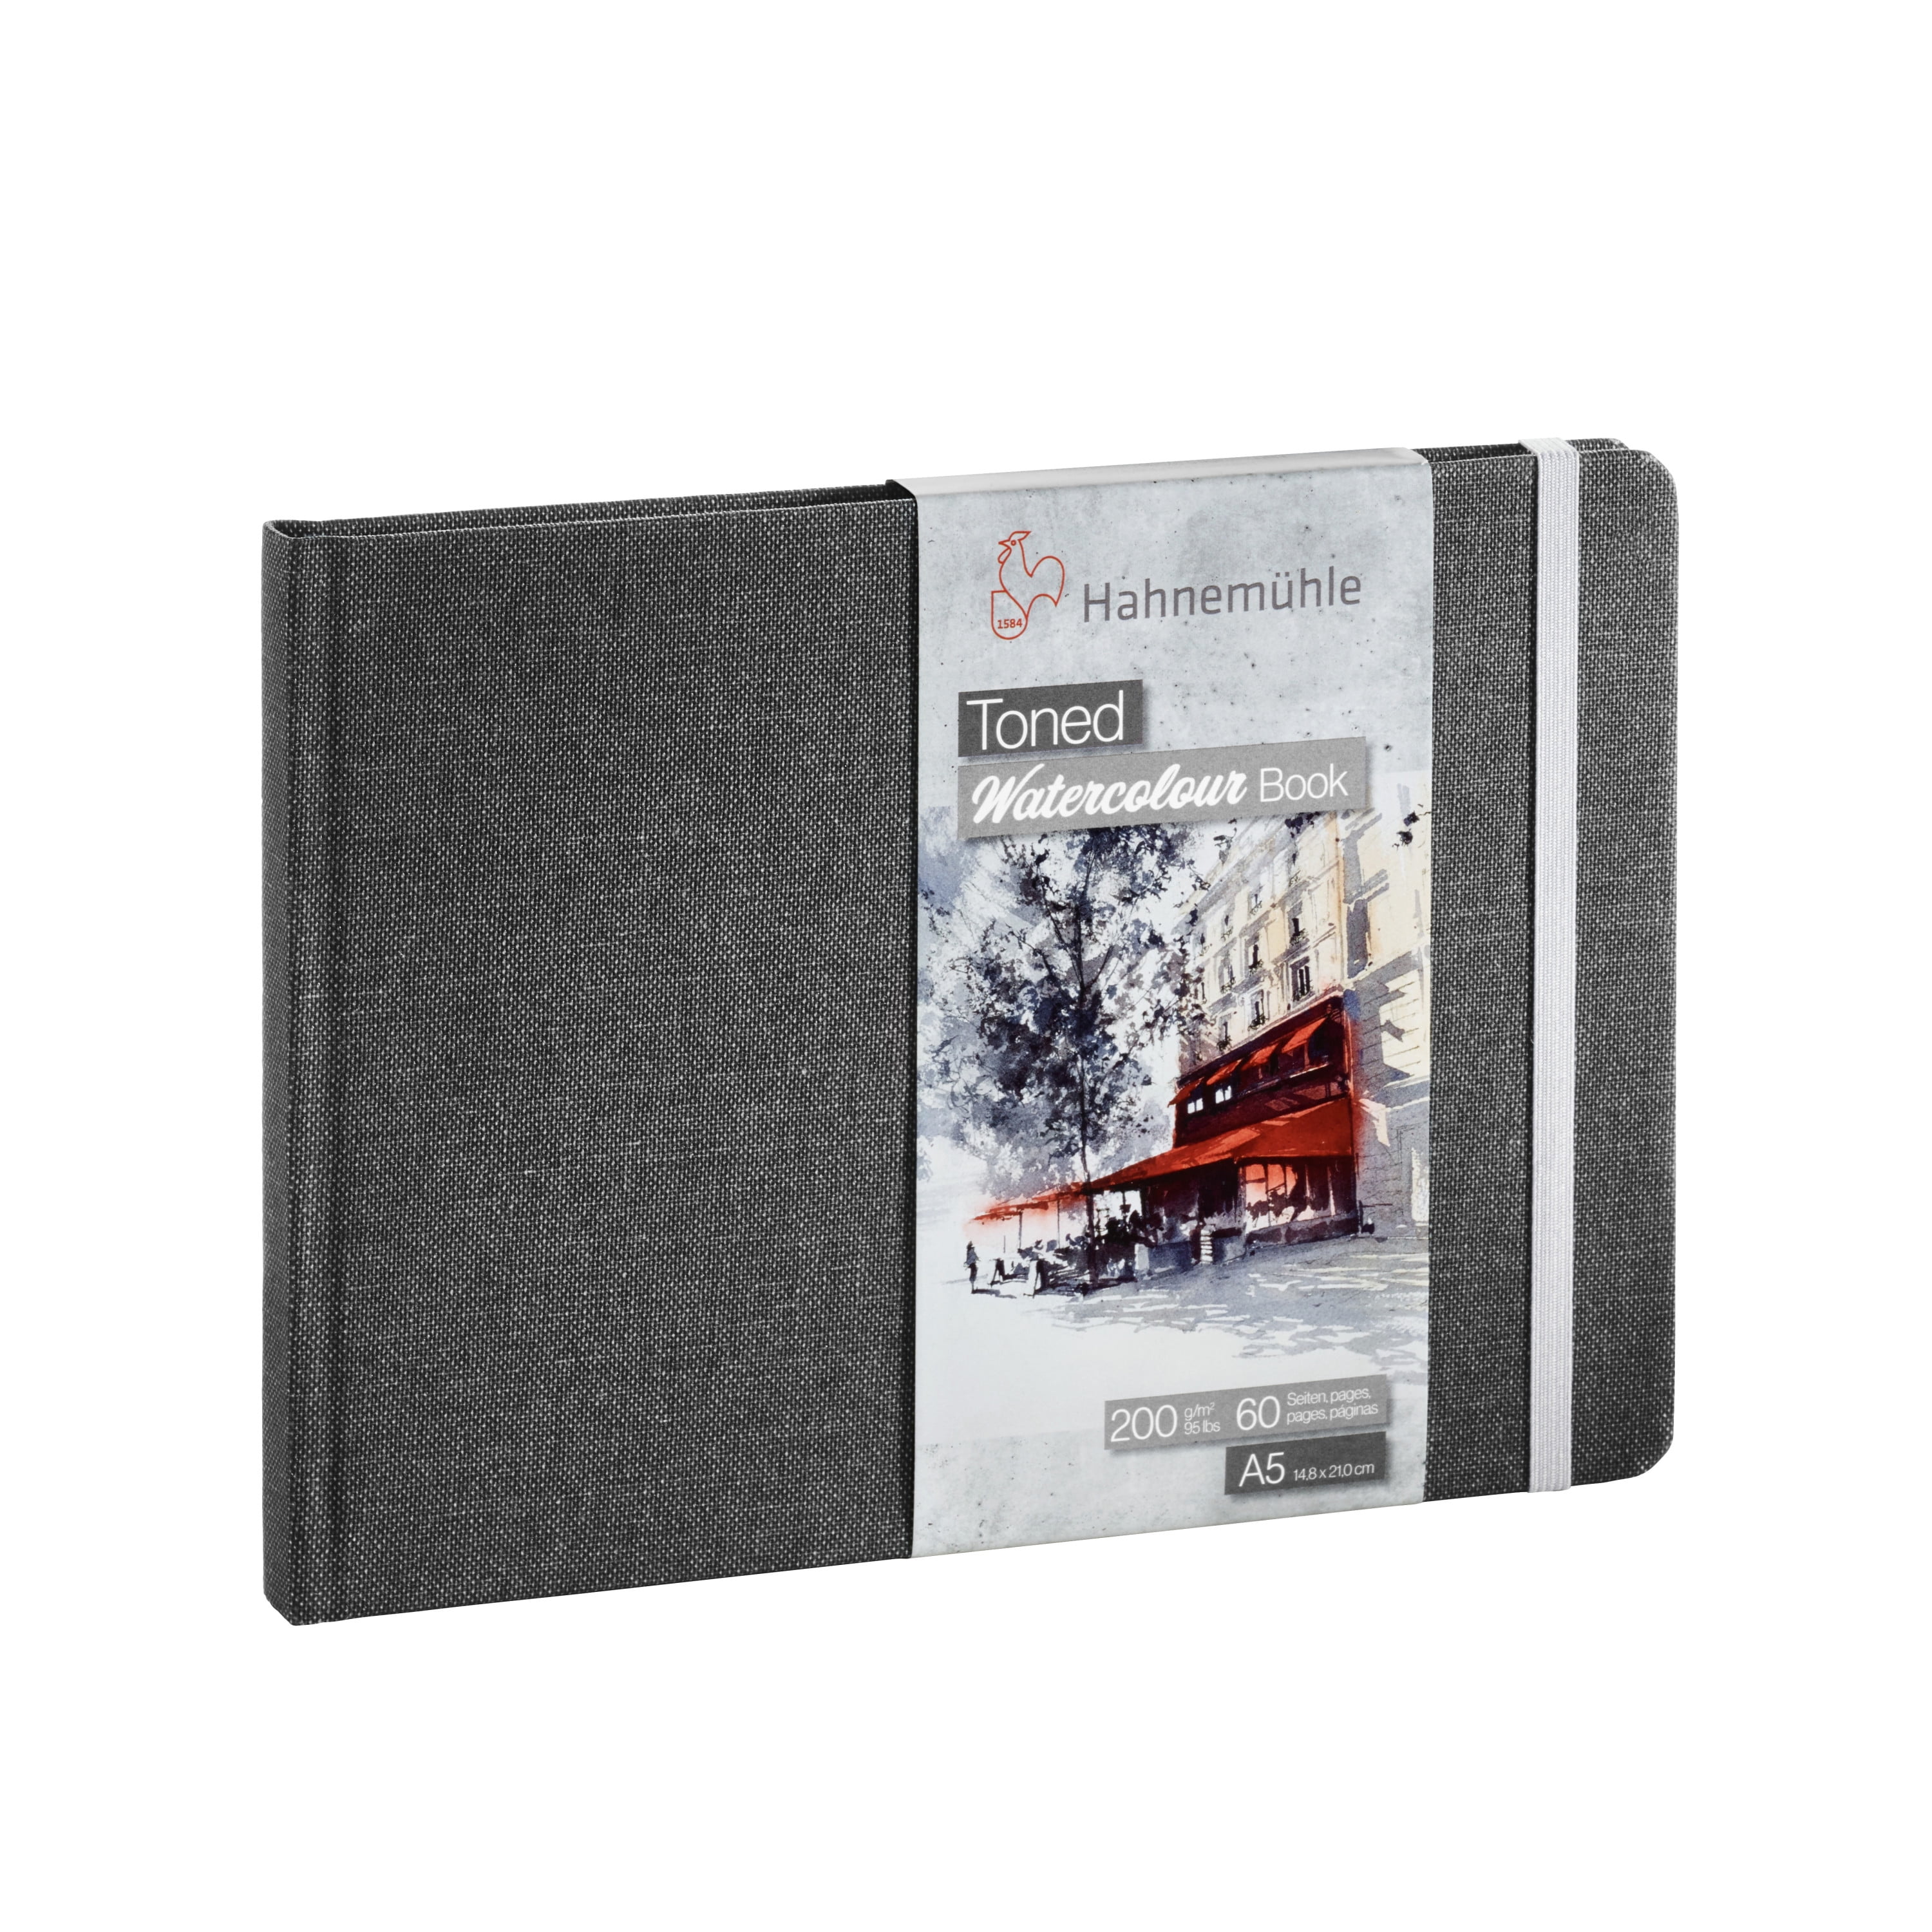 Hahnemuhle Toned Grey Watercolor Book A5